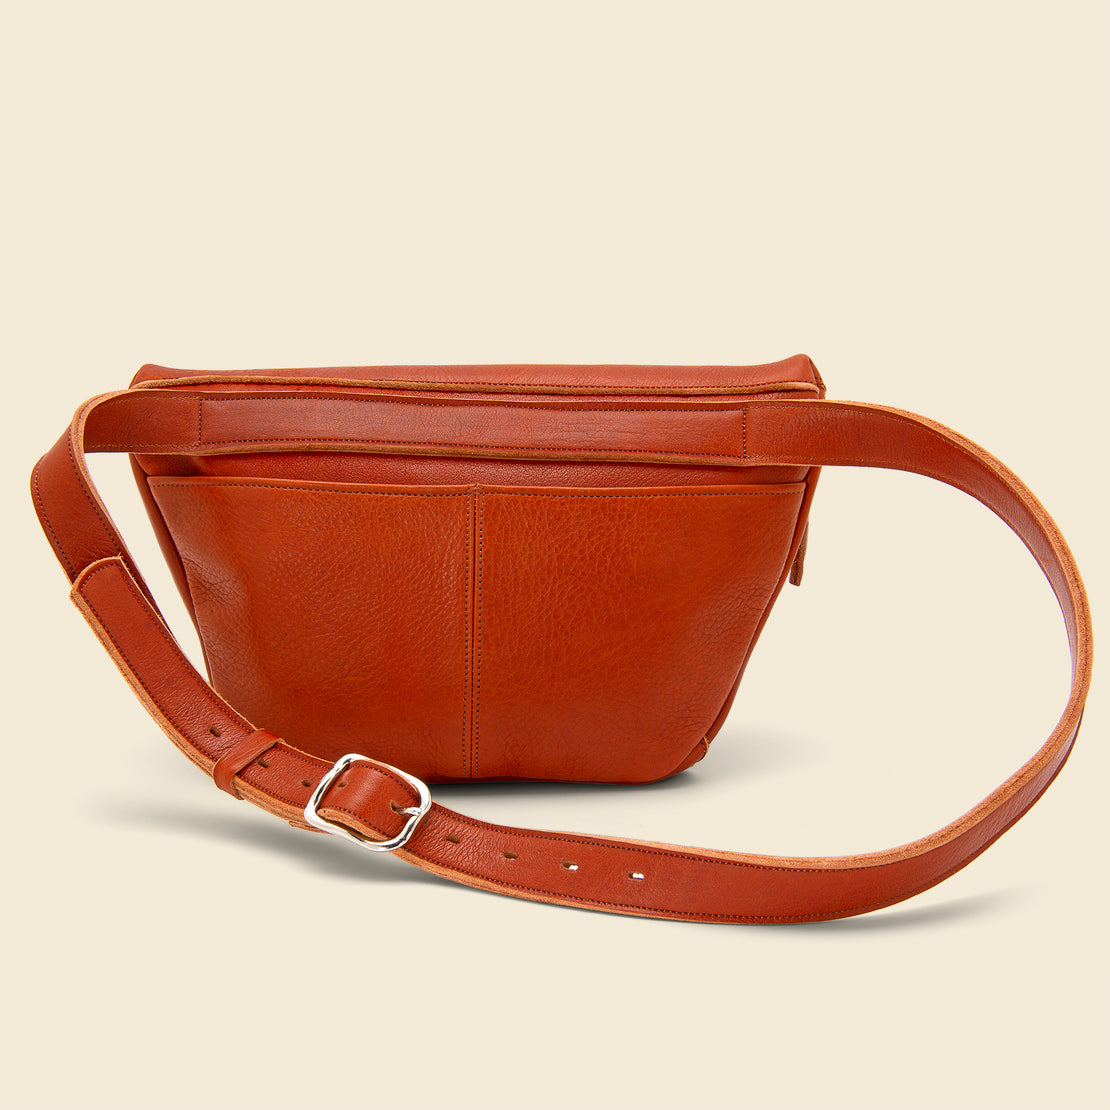 Ombu Leather Fanny Pack - Oxide - Nimes - STAG Provisions - W - Accessories - Bag